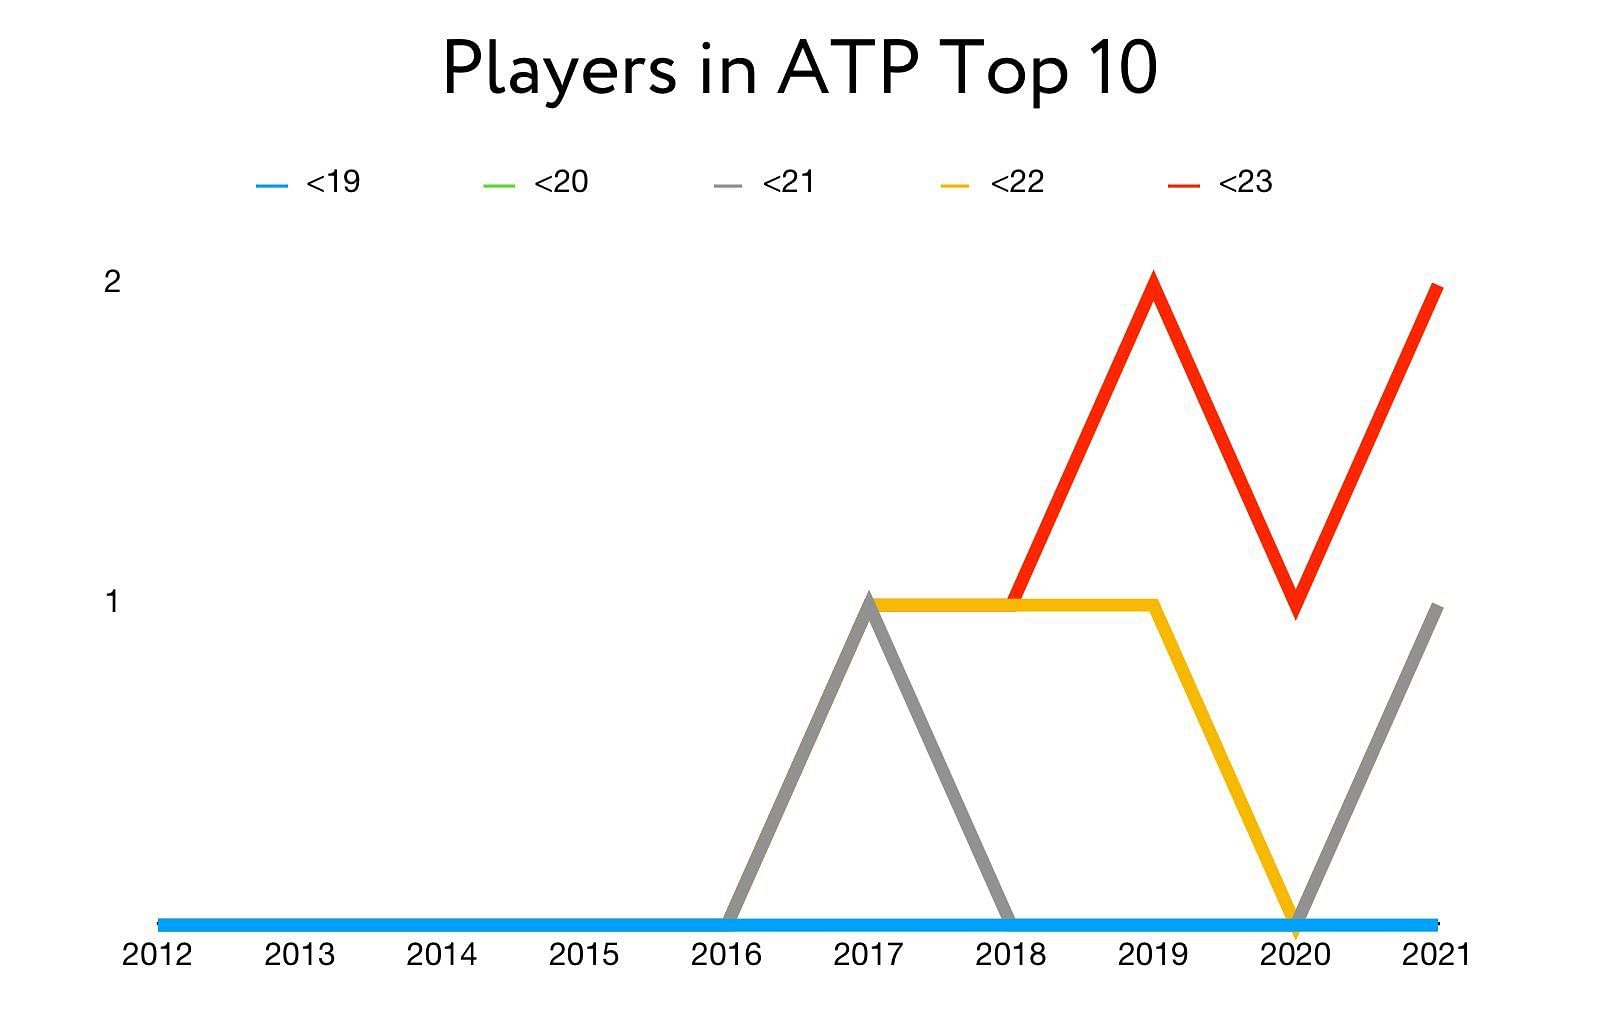 Top 10 players tennis ranking distribution by age (under 23)